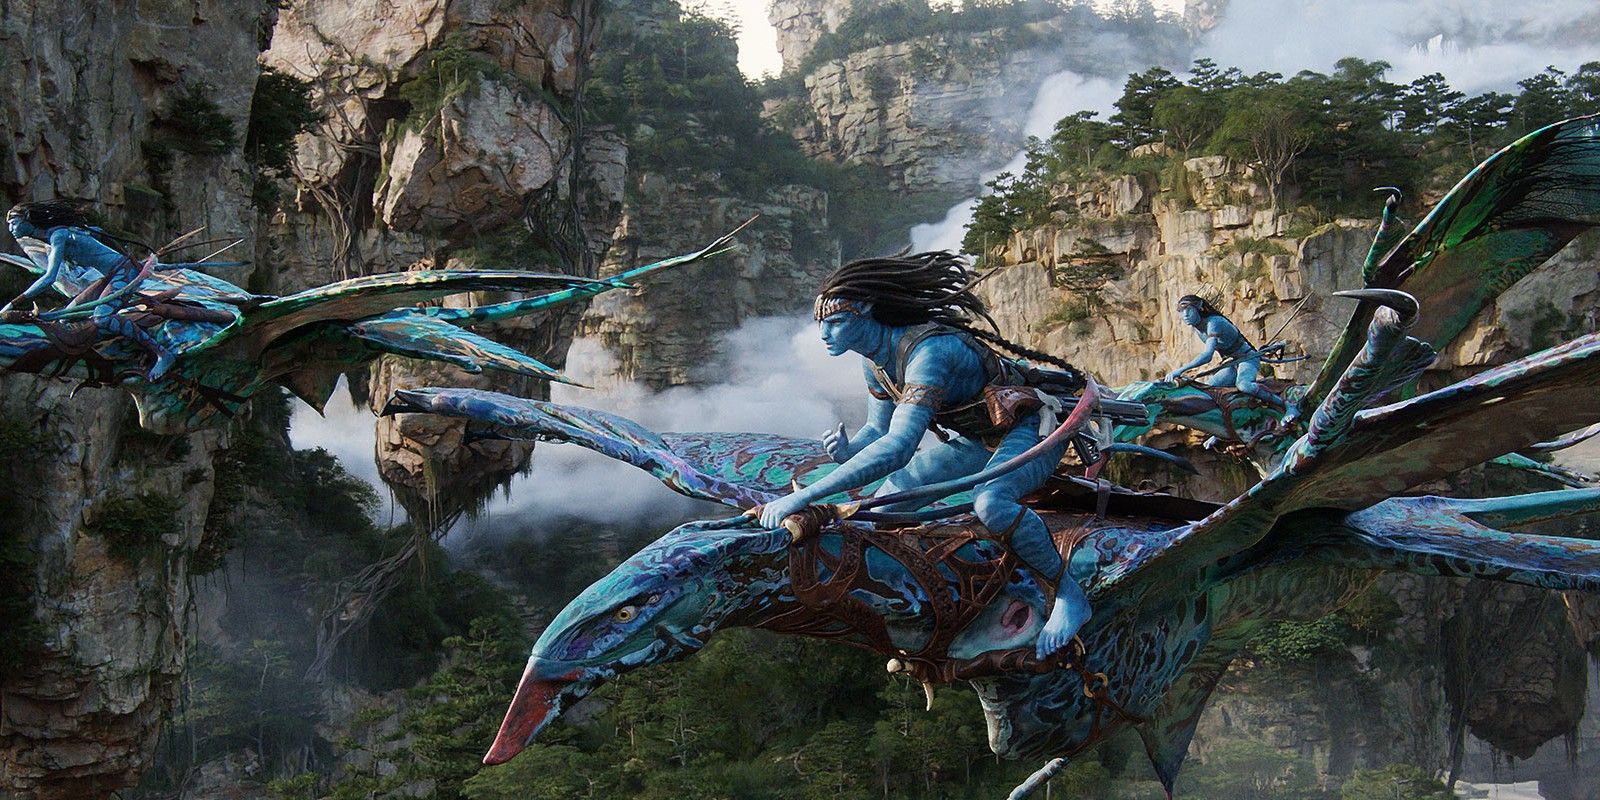 Na'vi characters flying on creatures in James Cameron's Avatar: The Way of Water.